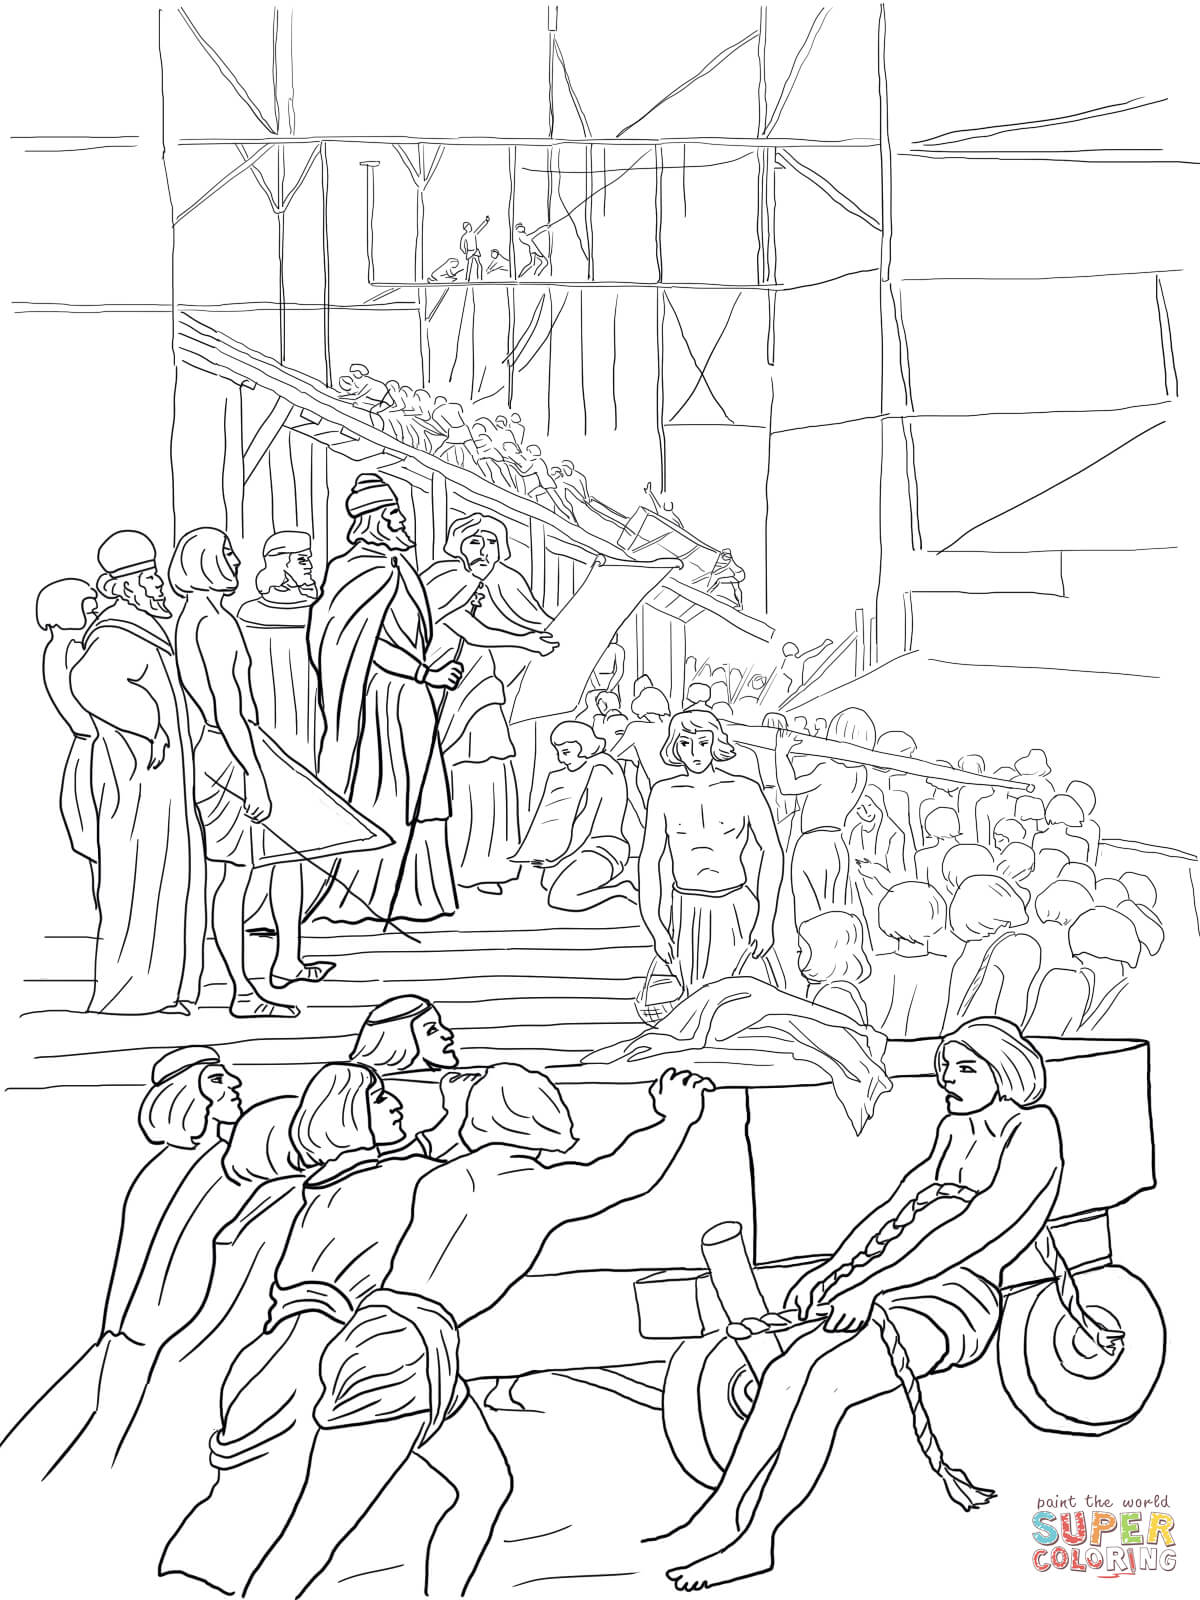 King solomon builds the temple coloring page free printable coloring pages